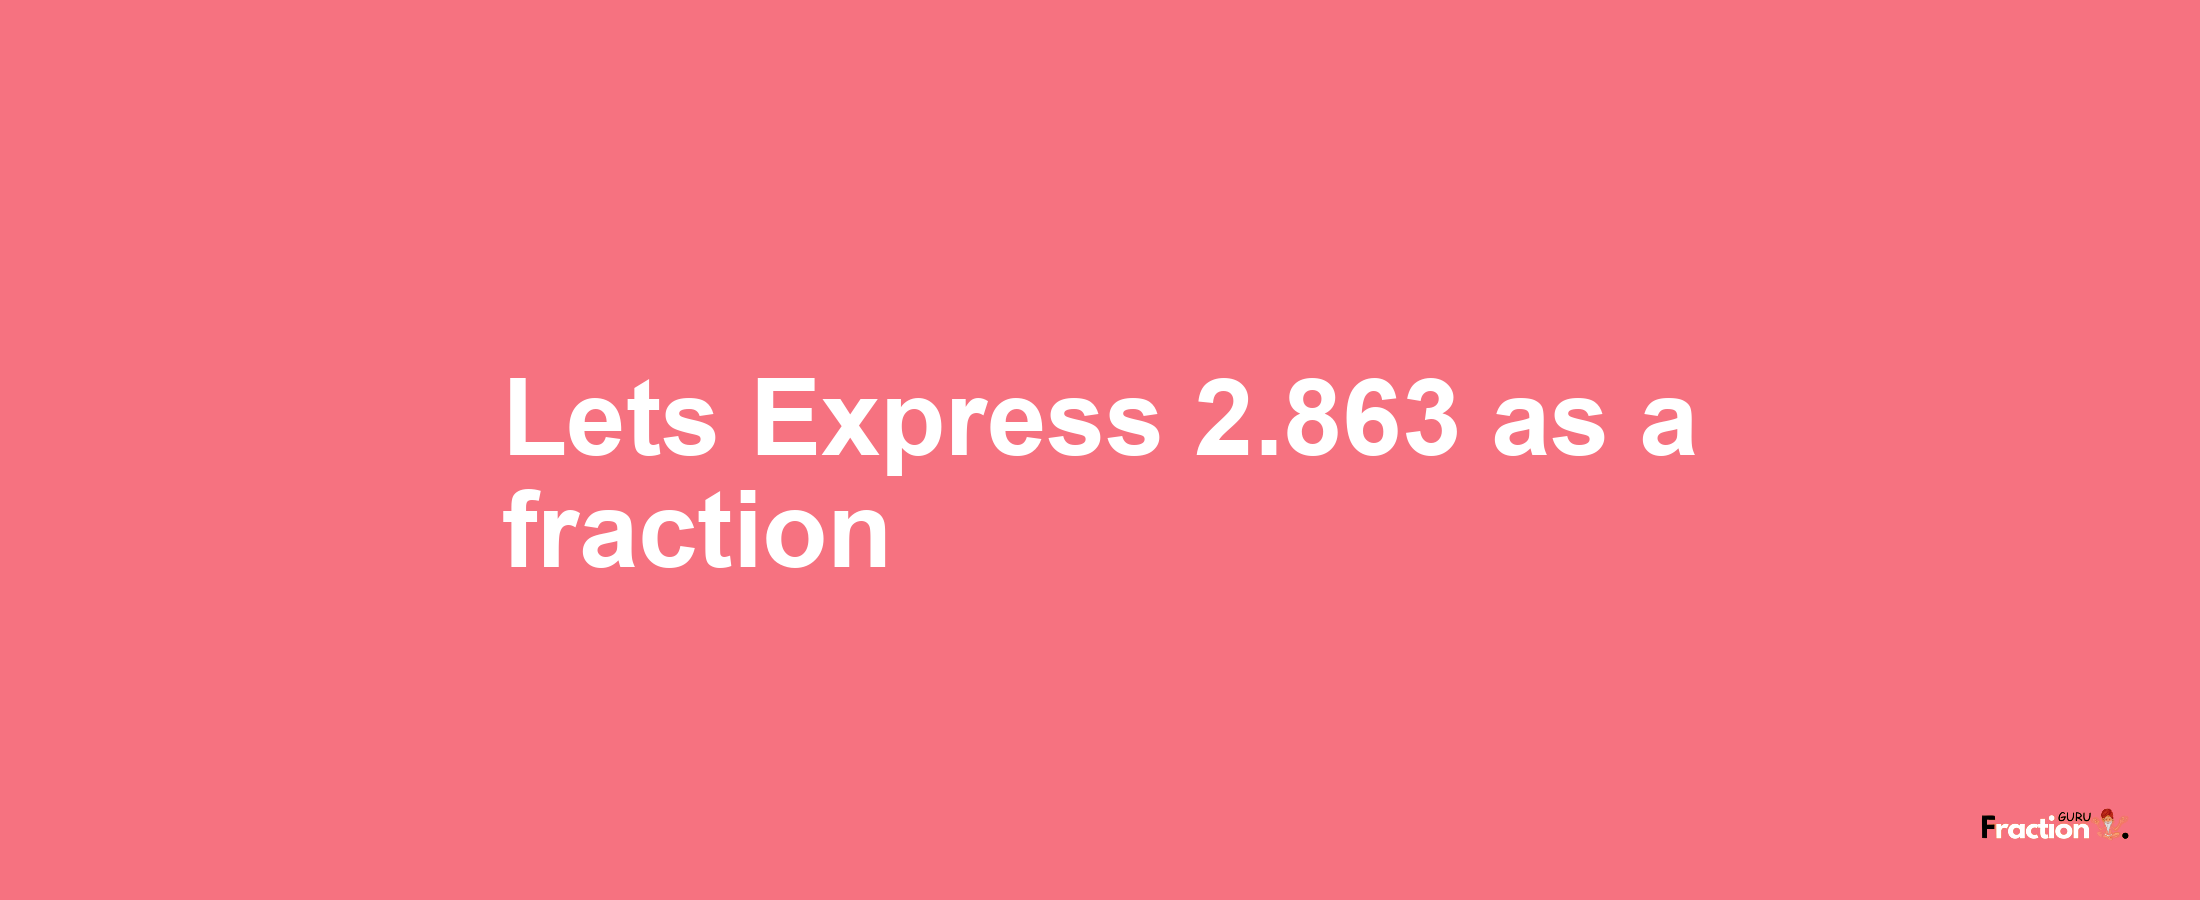 Lets Express 2.863 as afraction